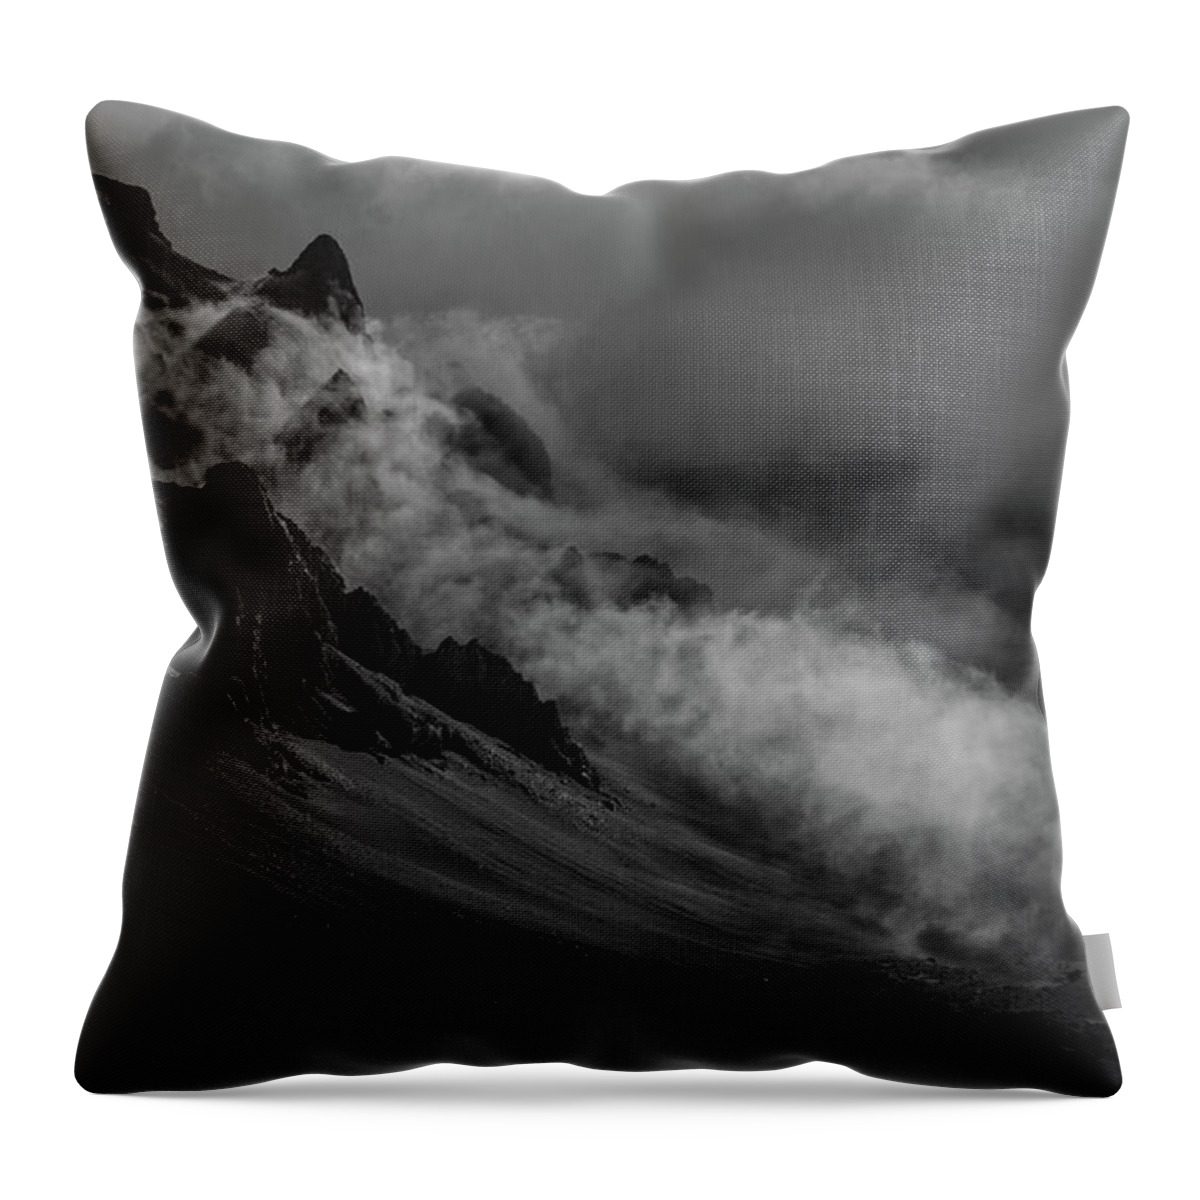 Volcano Throw Pillow featuring the photograph Haleakala Crater by Jeff Phillippi